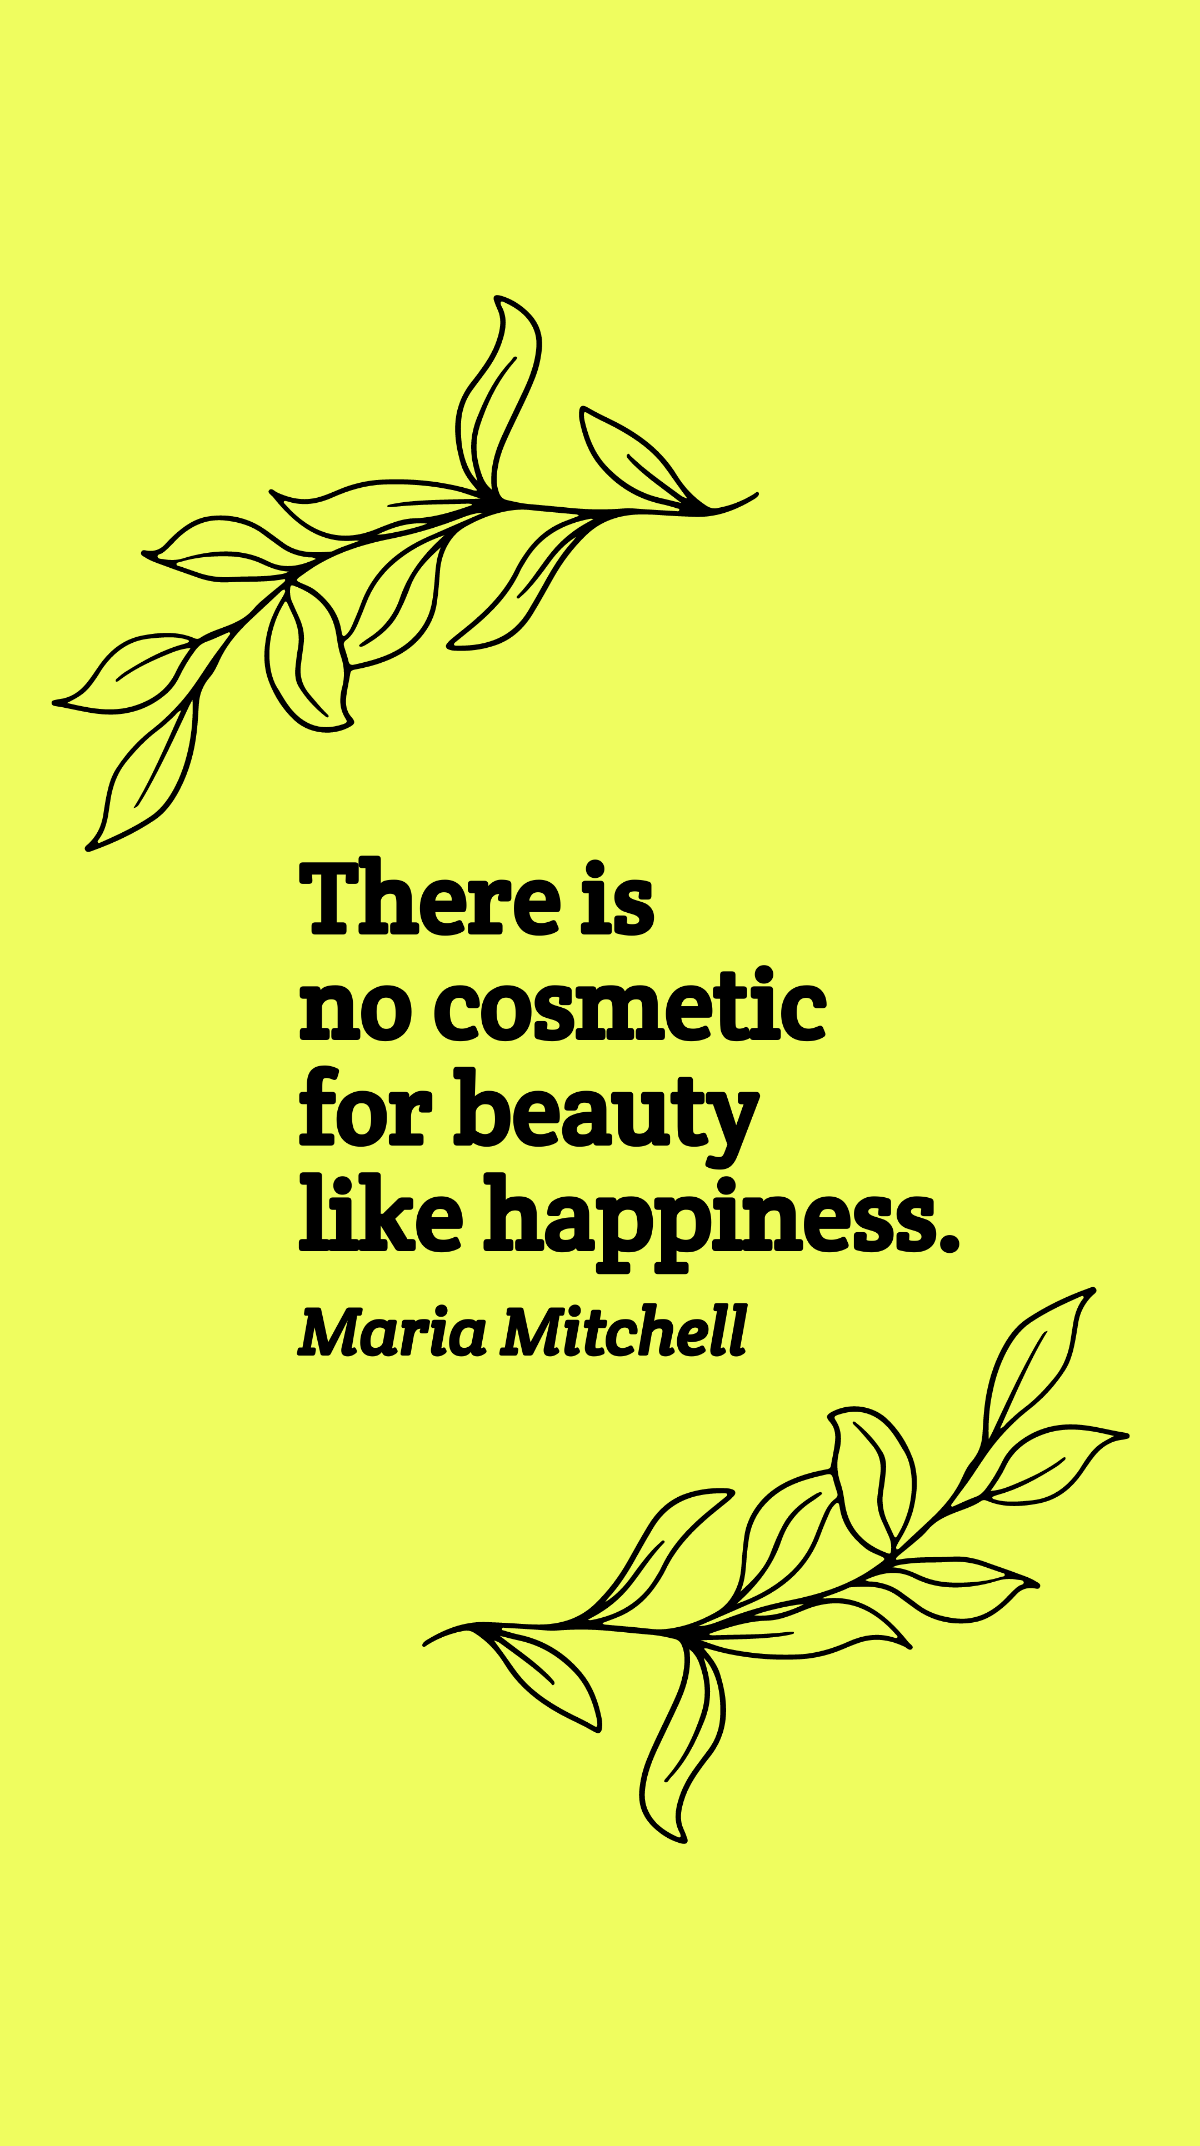 Maria Mitchell - There is no cosmetic for beauty like happiness.